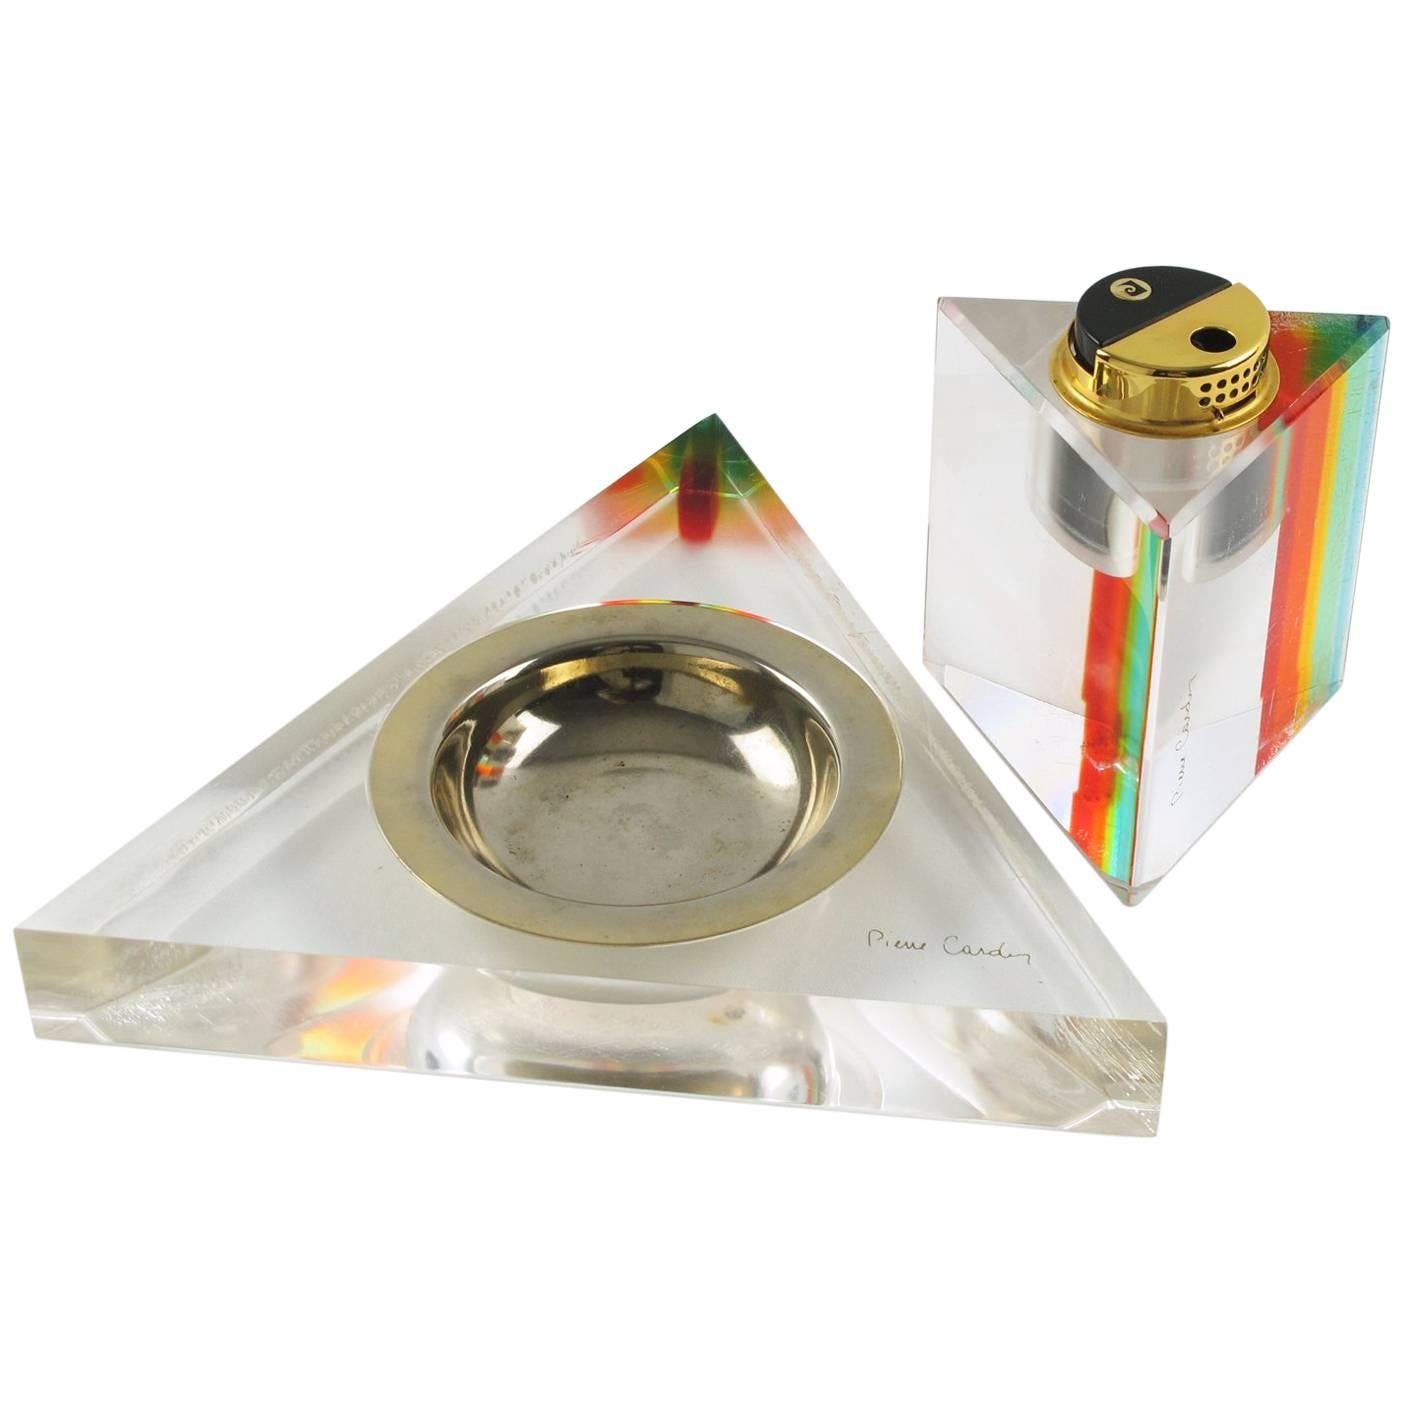 Mid-Century Modern Lucite Smoking Set Ashtray & Lighter by Pierre Cardin, 1970s